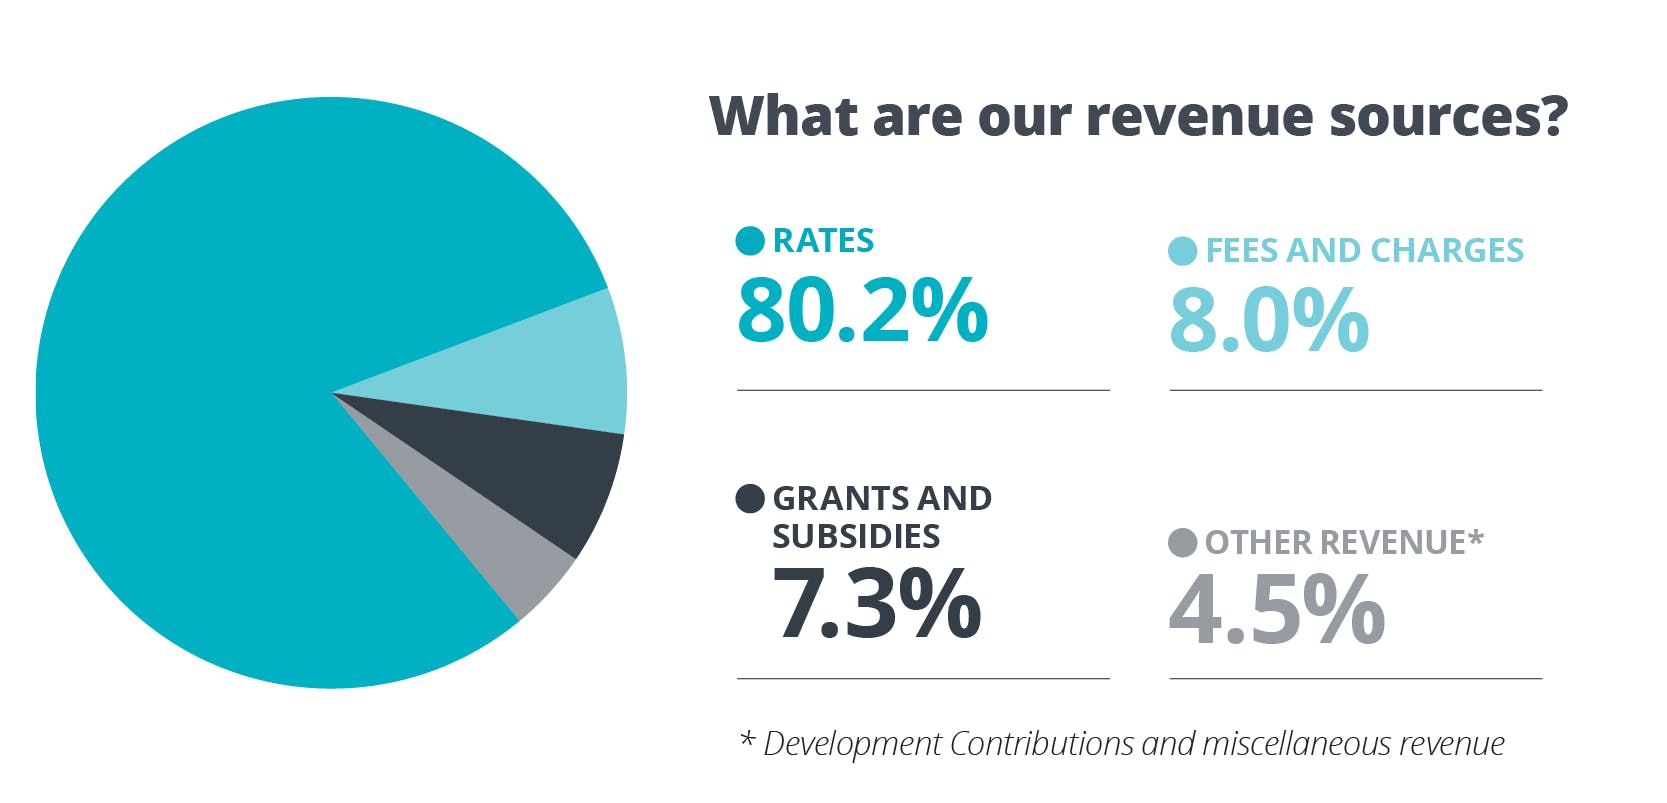 What are our revenue sources?